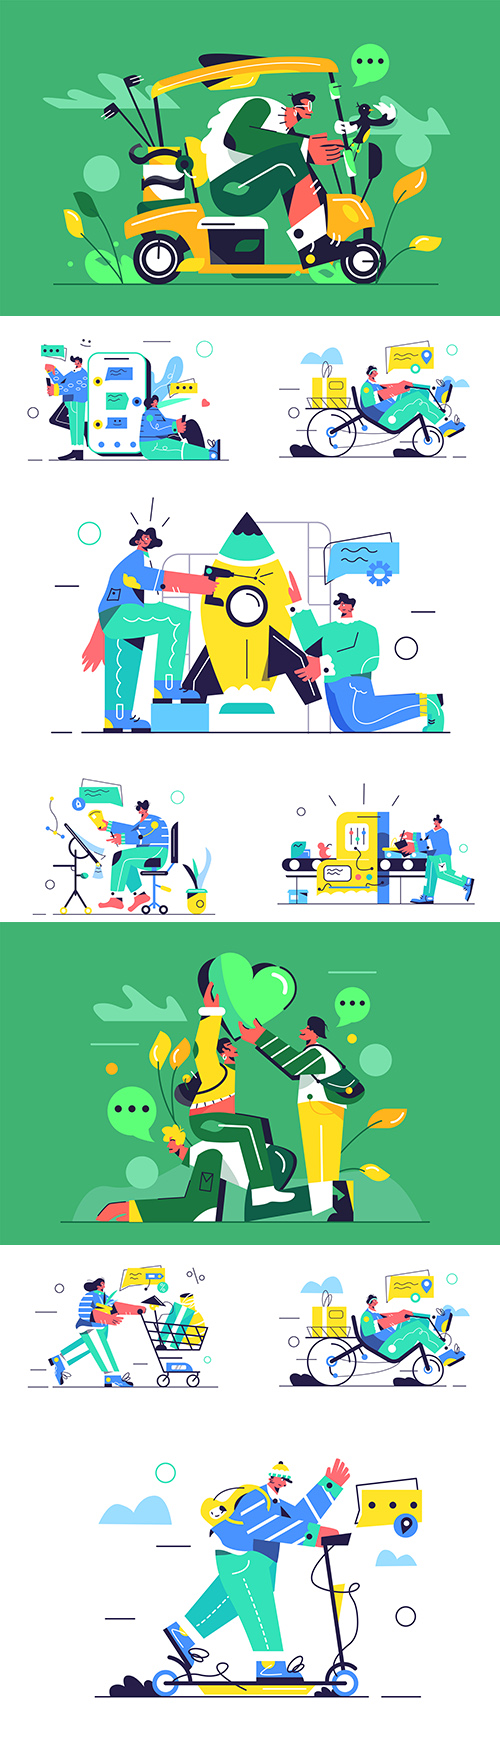 Young girl and guy in the store, at work illustrations flat design
